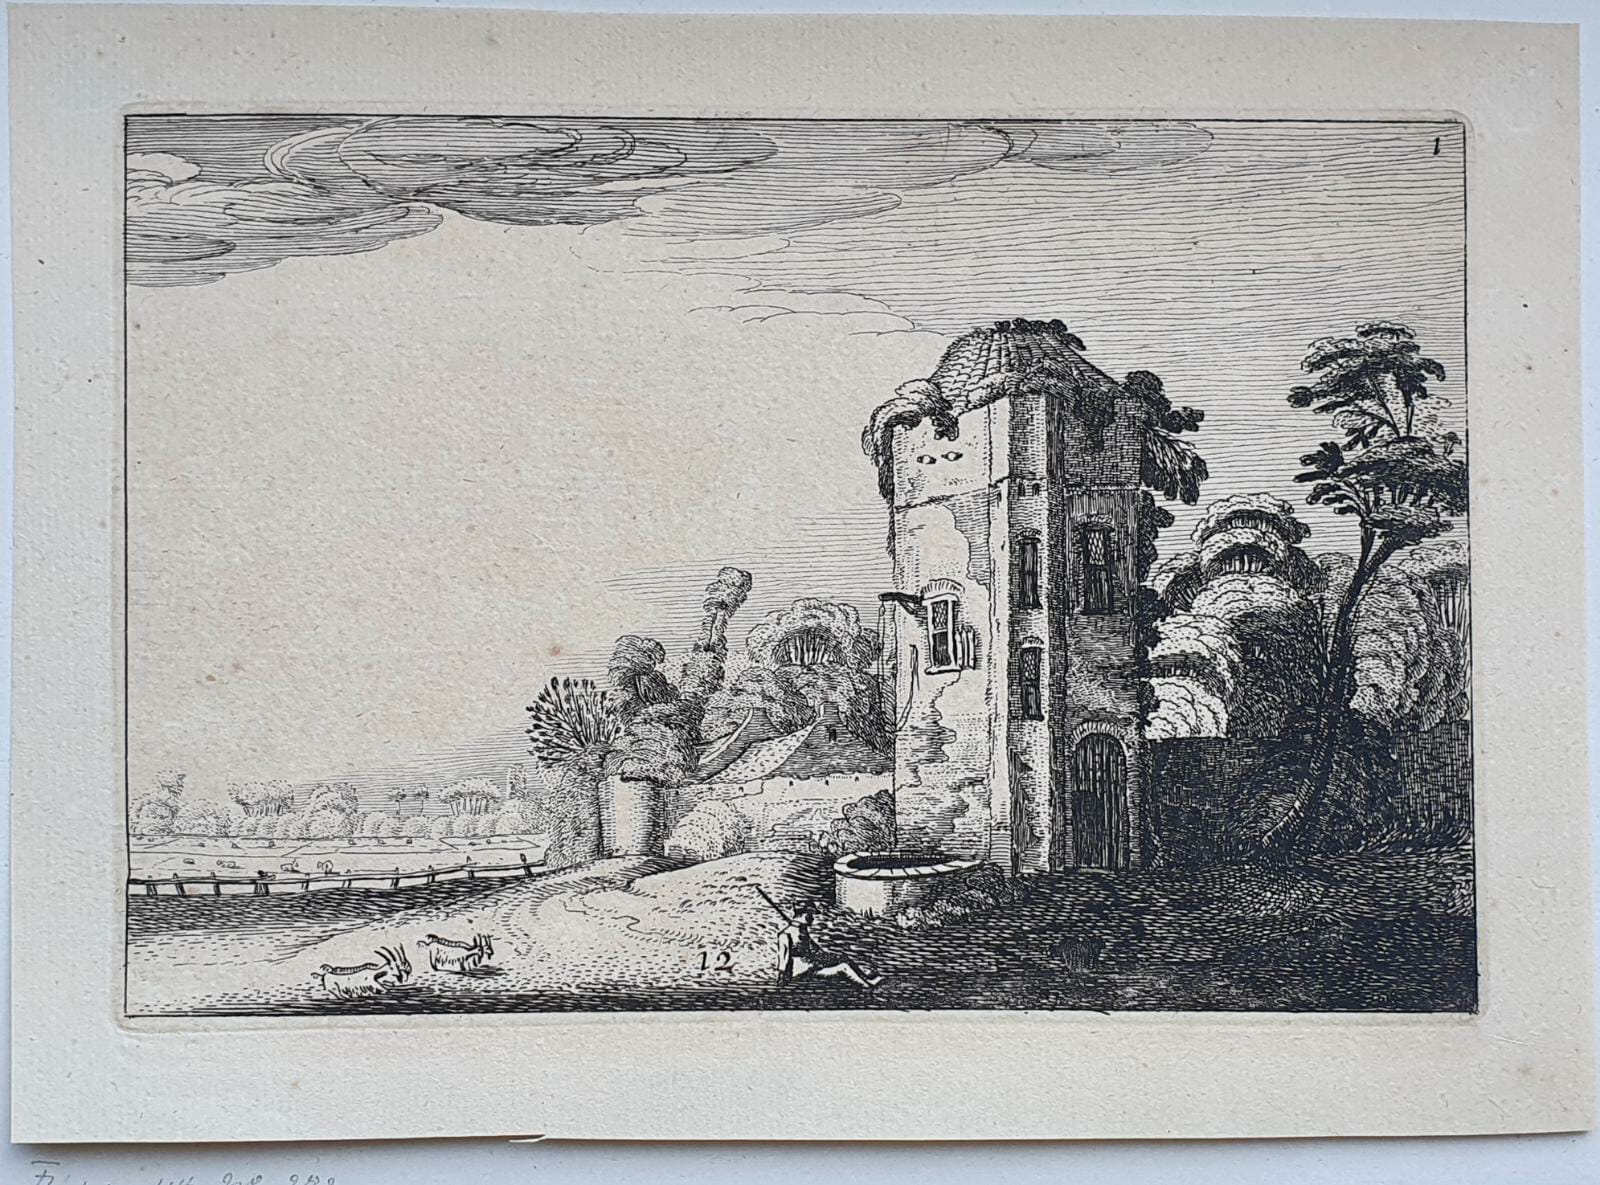 [Antique etching, ets, landscape print] J. v.d. Velde II, Shepherd at a tower with a well, published before 1713.